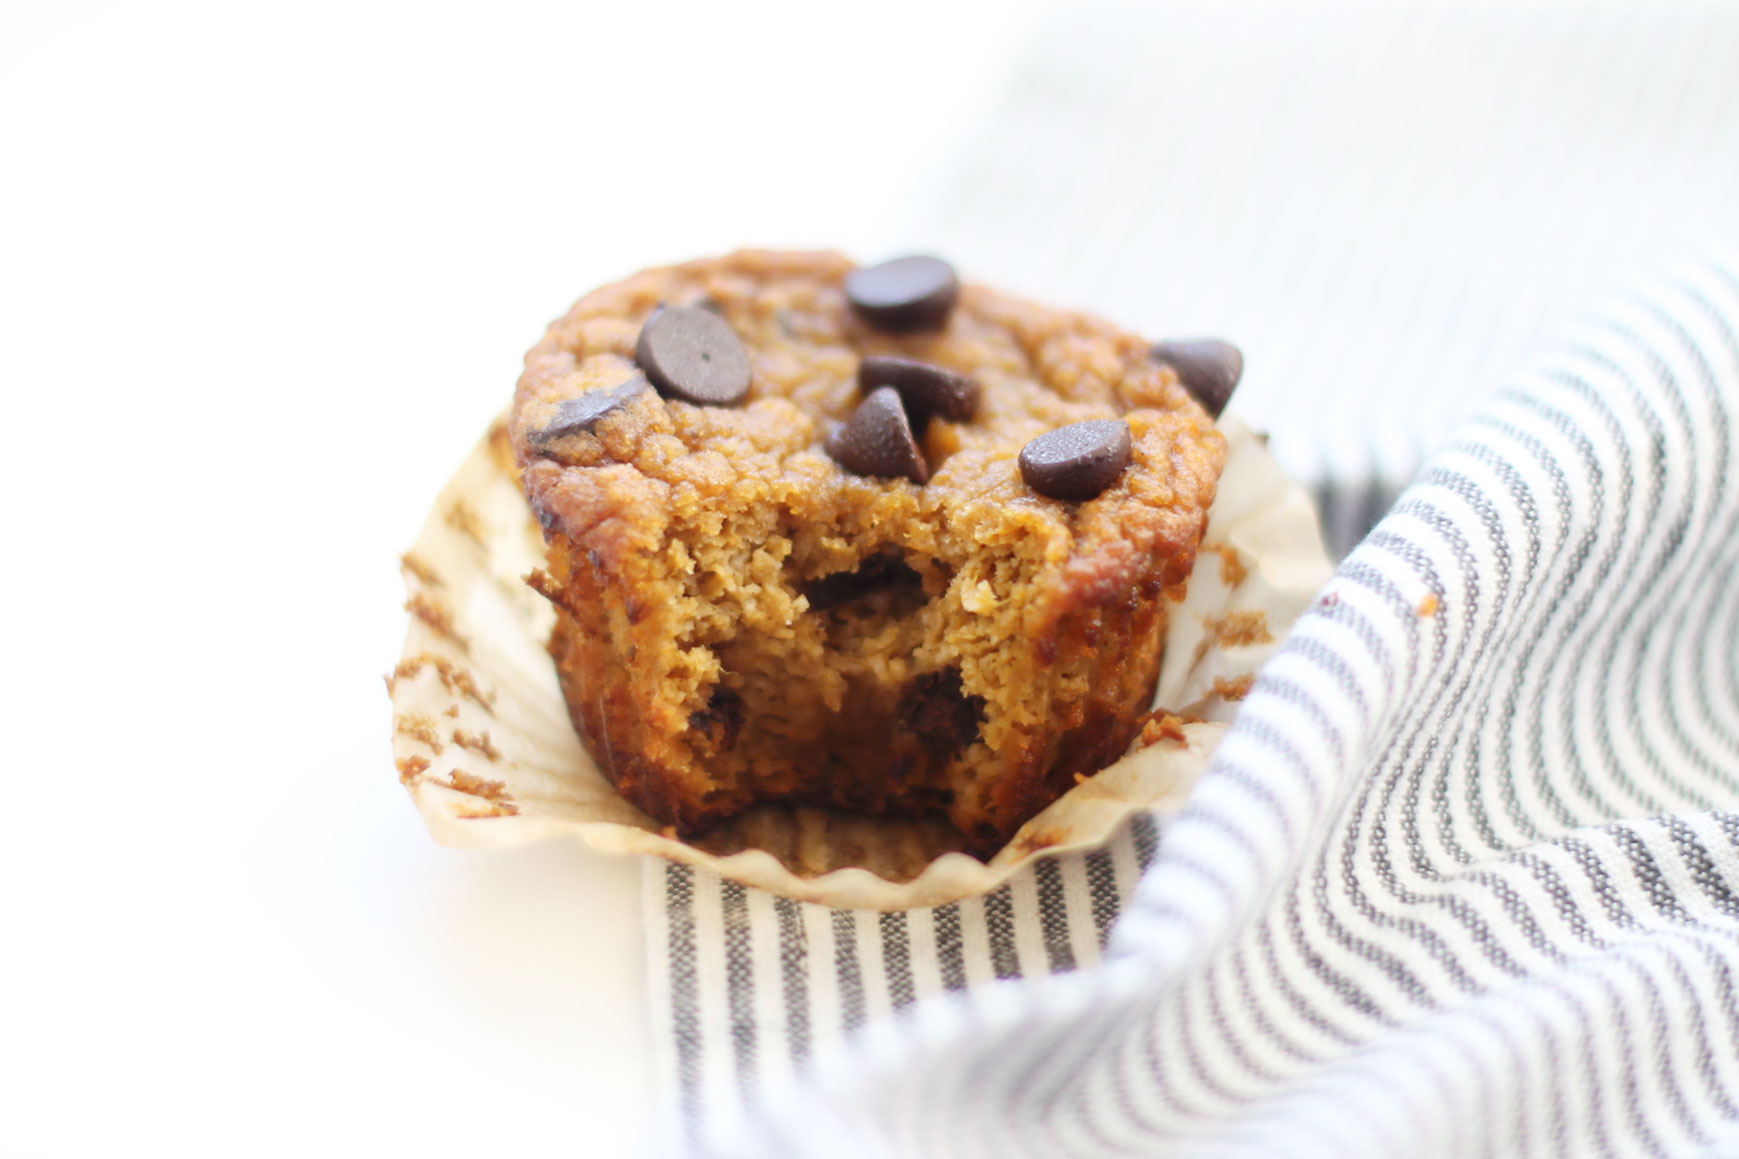 We've created the perfect healthy muffin! Fluffy roasted sweet potato muffins made with almond flour (i.e., gluten-free), greek yogurt (or coconut yogurt to keep it dairy-free!), plus a handful of chocolate chips; you'll be amazed at what a healthy vegan and paleo on-the-go breakfast or snack can taste like. Click through for the recipe. | glitterinc.com | @glitterinc #muffins #healthybreakfast #healthymuffins